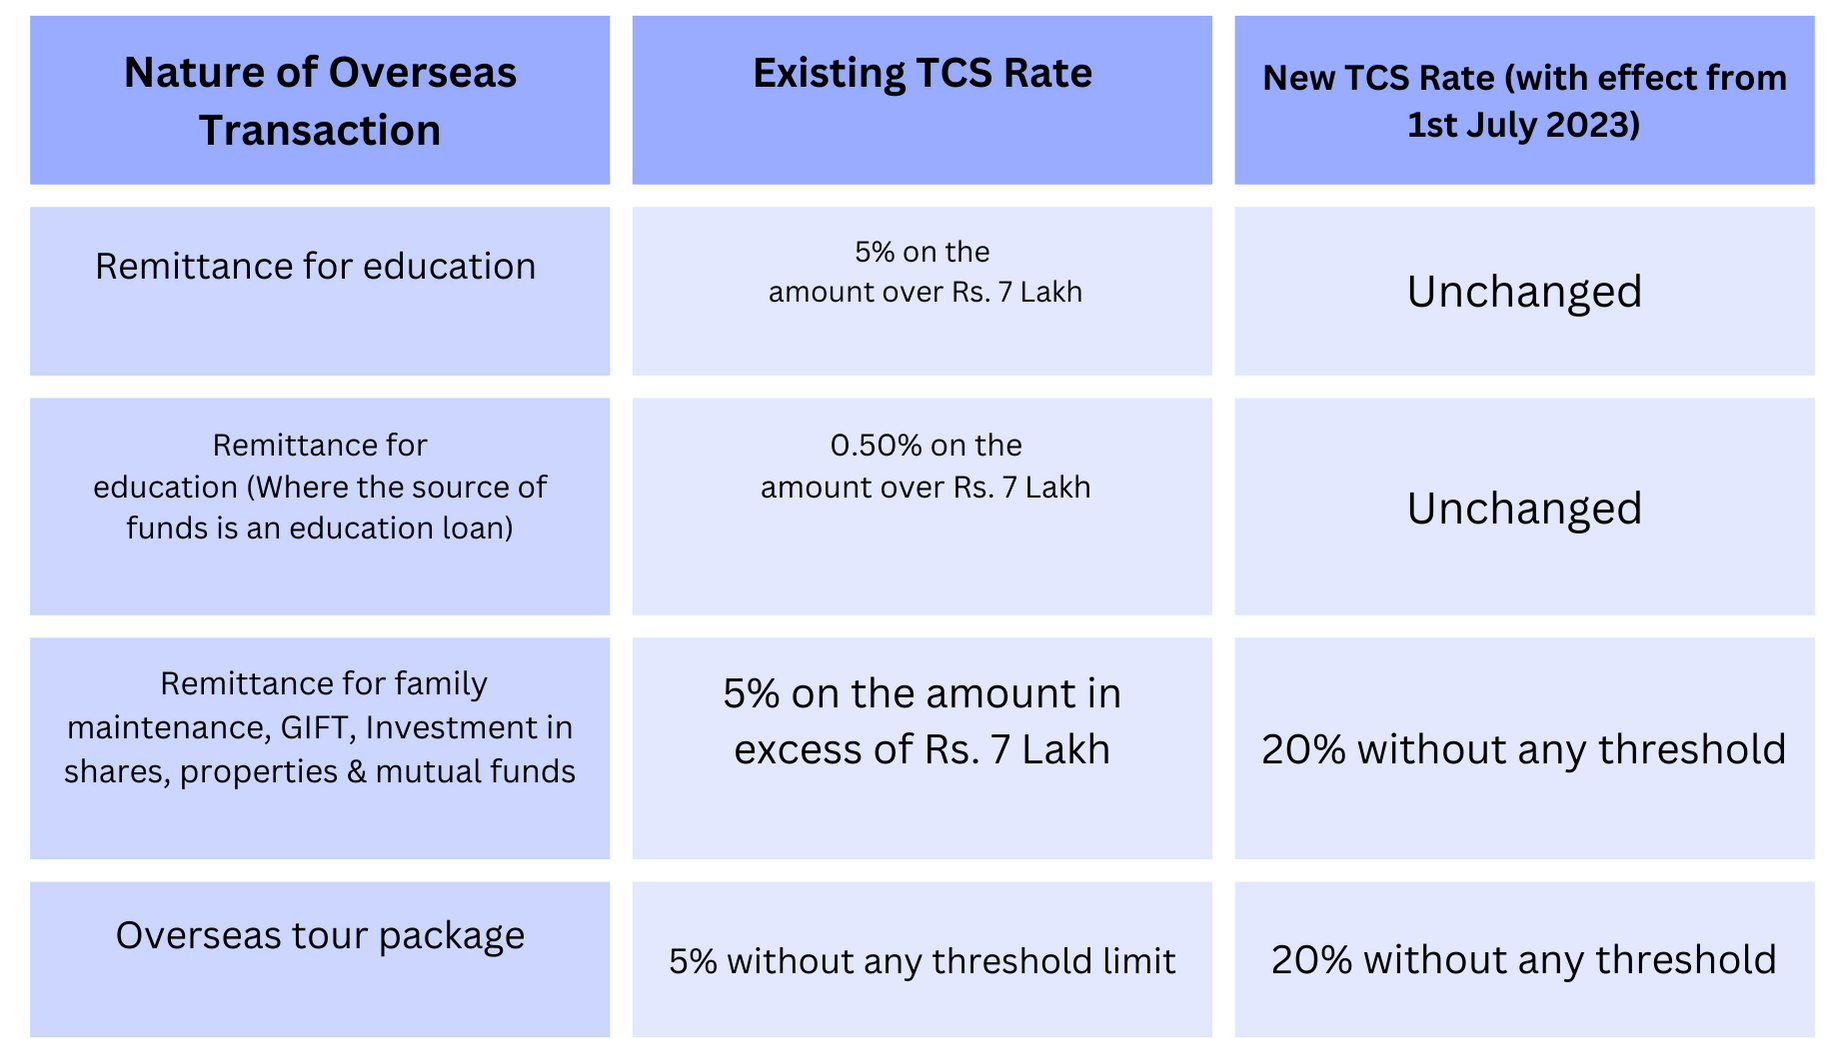 Existing TCS Rate